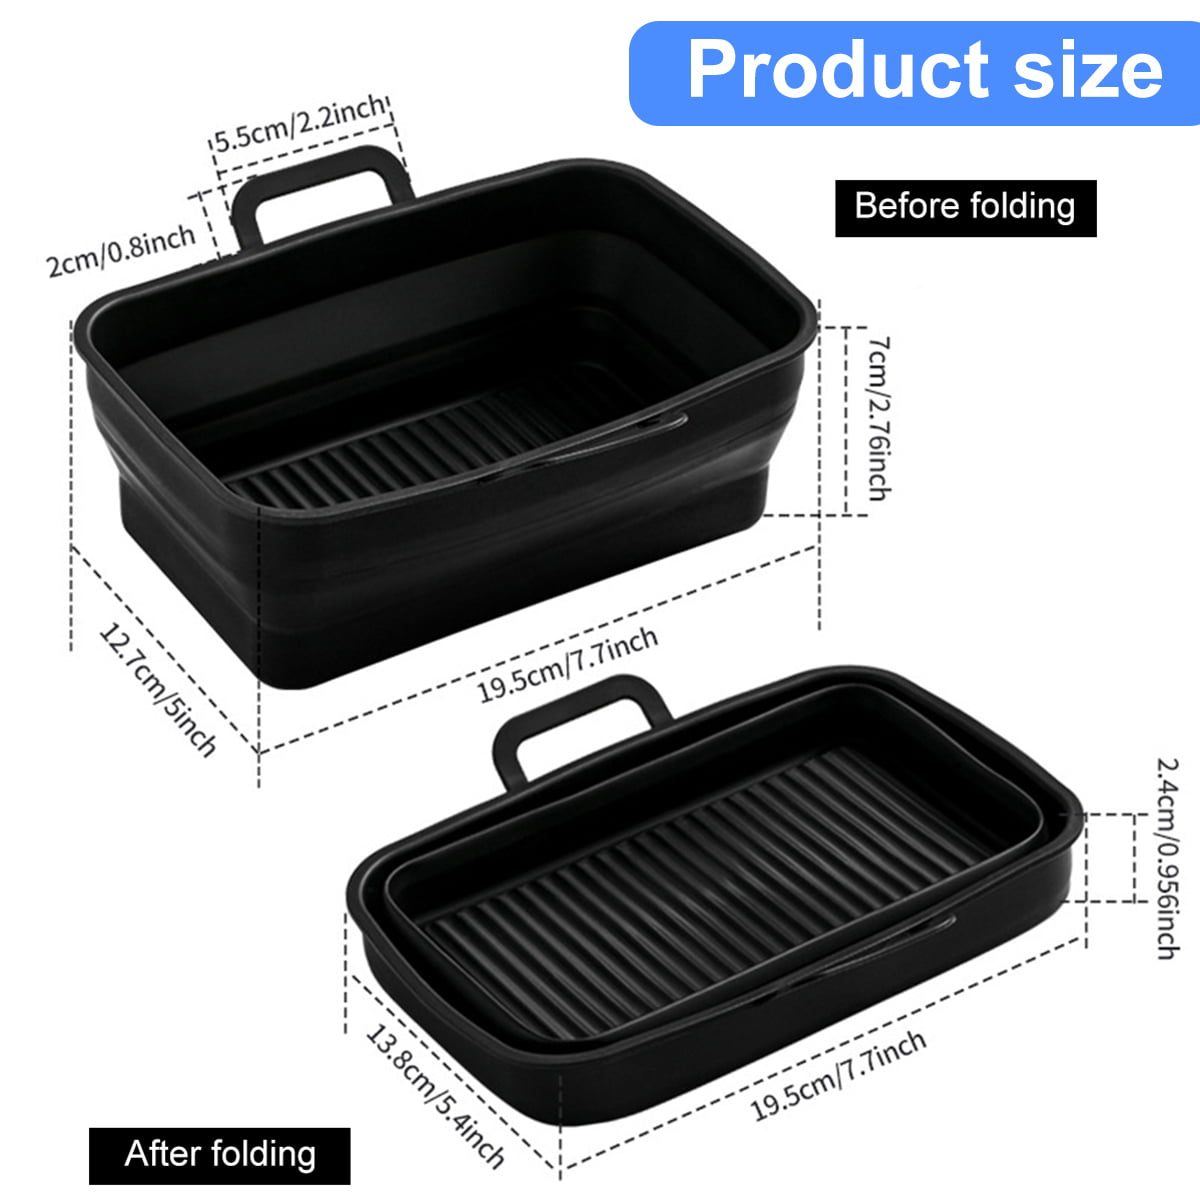 Rectangle Oven Baking Tray Baking Baskets Silicone Pot Heating Baking Pan  For Ninja Air Fryer Kitchen Accessories 22.5x13x6.5cm